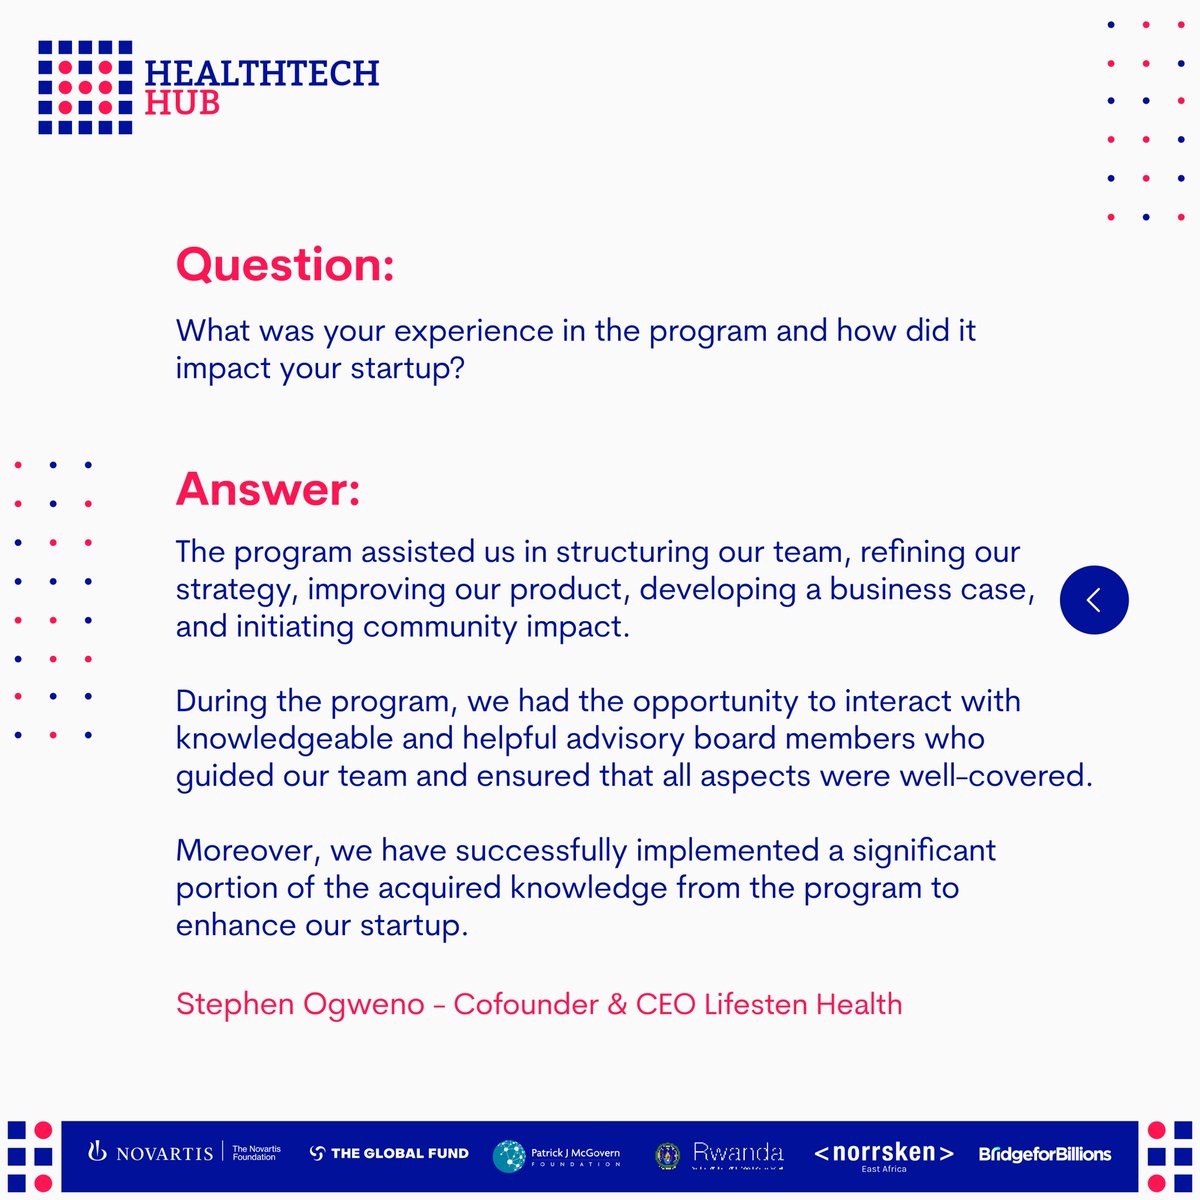 Hear the inspiring stories of the outgoing start-ups from the HealthTech Hub Africa Accelerator Program 2022. @lifesten_health 

#healthtech #healthtechstartup #healthinnovation